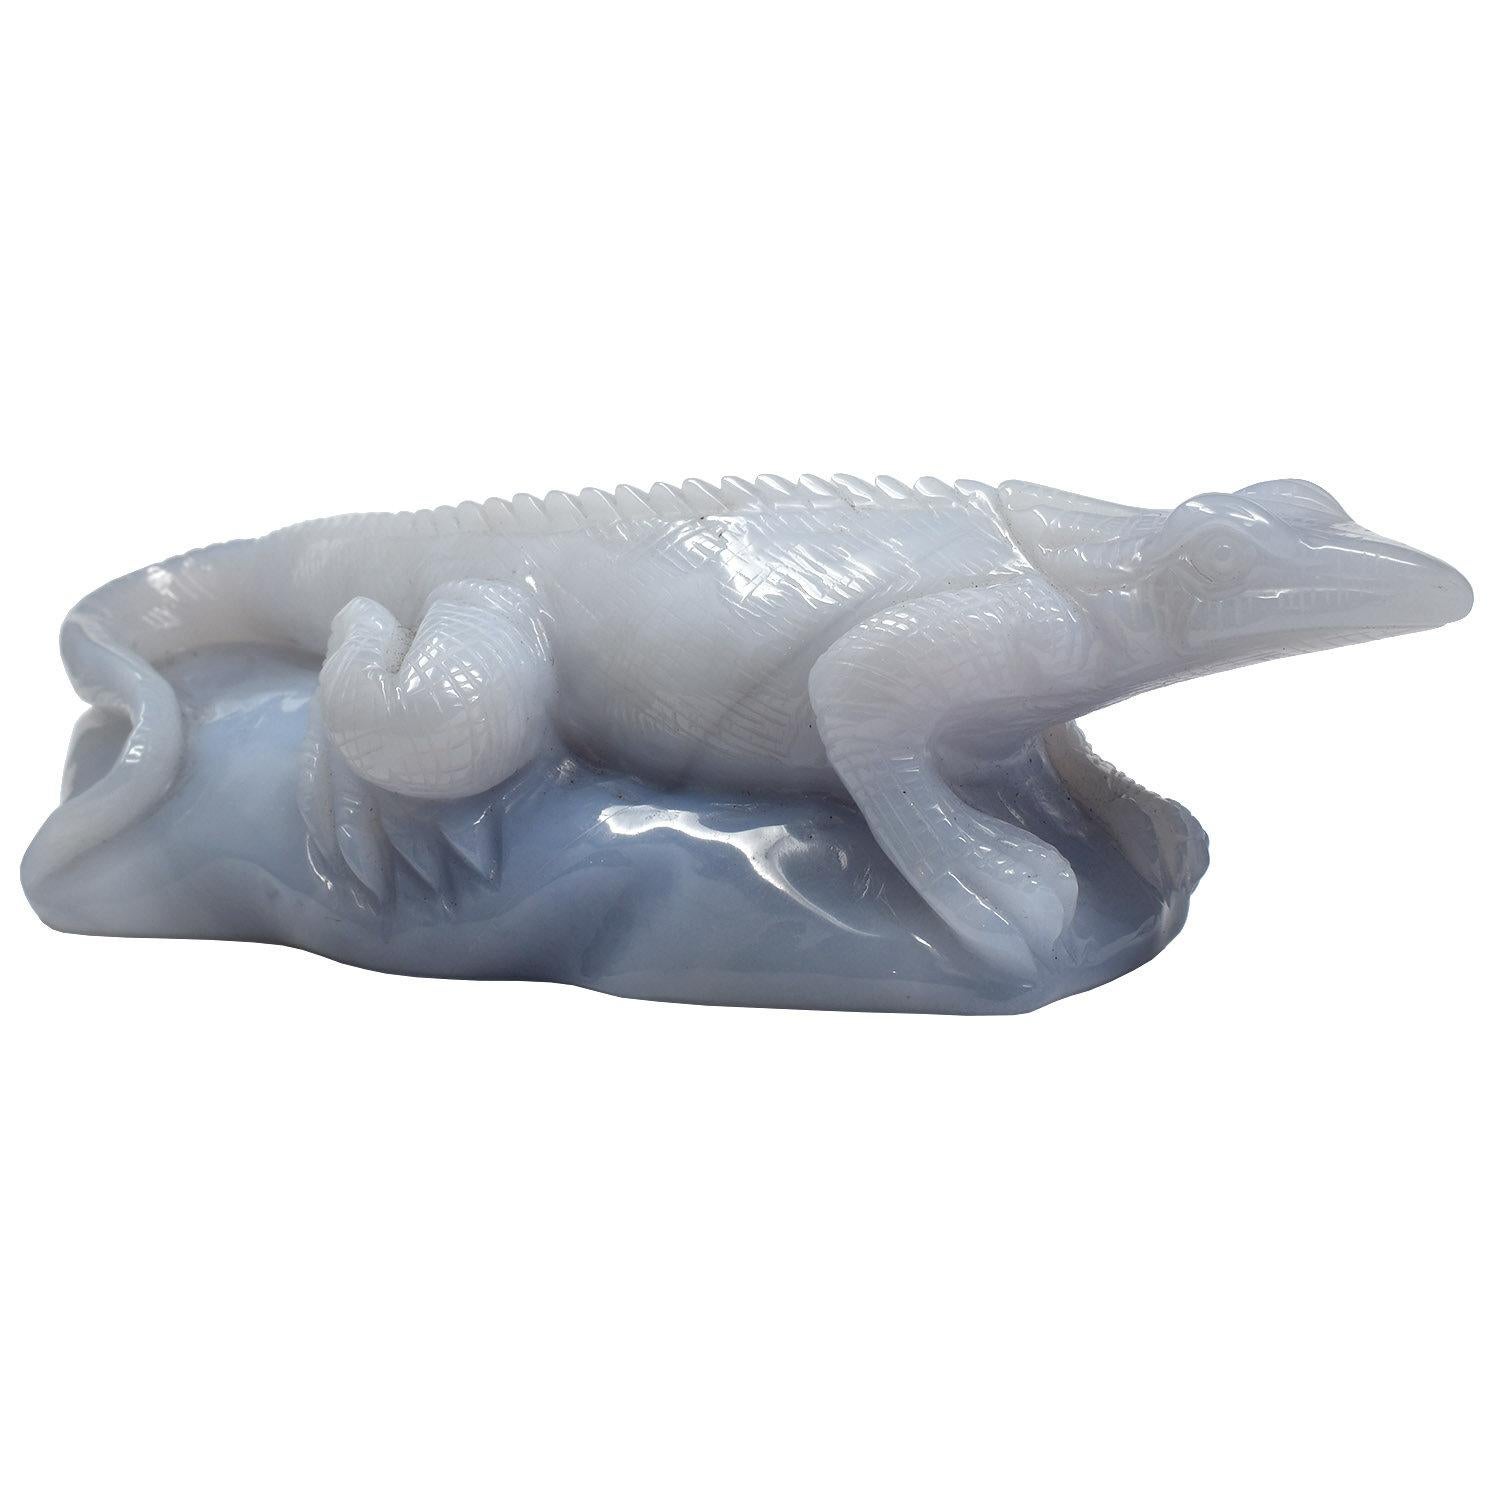 This nicely proportioned, finely carved hardstone sculpture captures these reptiles’ enigmatic, curious presence. The milky blue translucence of the stone adds to the effect. 

Chalcedony is a microcrystalline form of silica, composed of quartz and